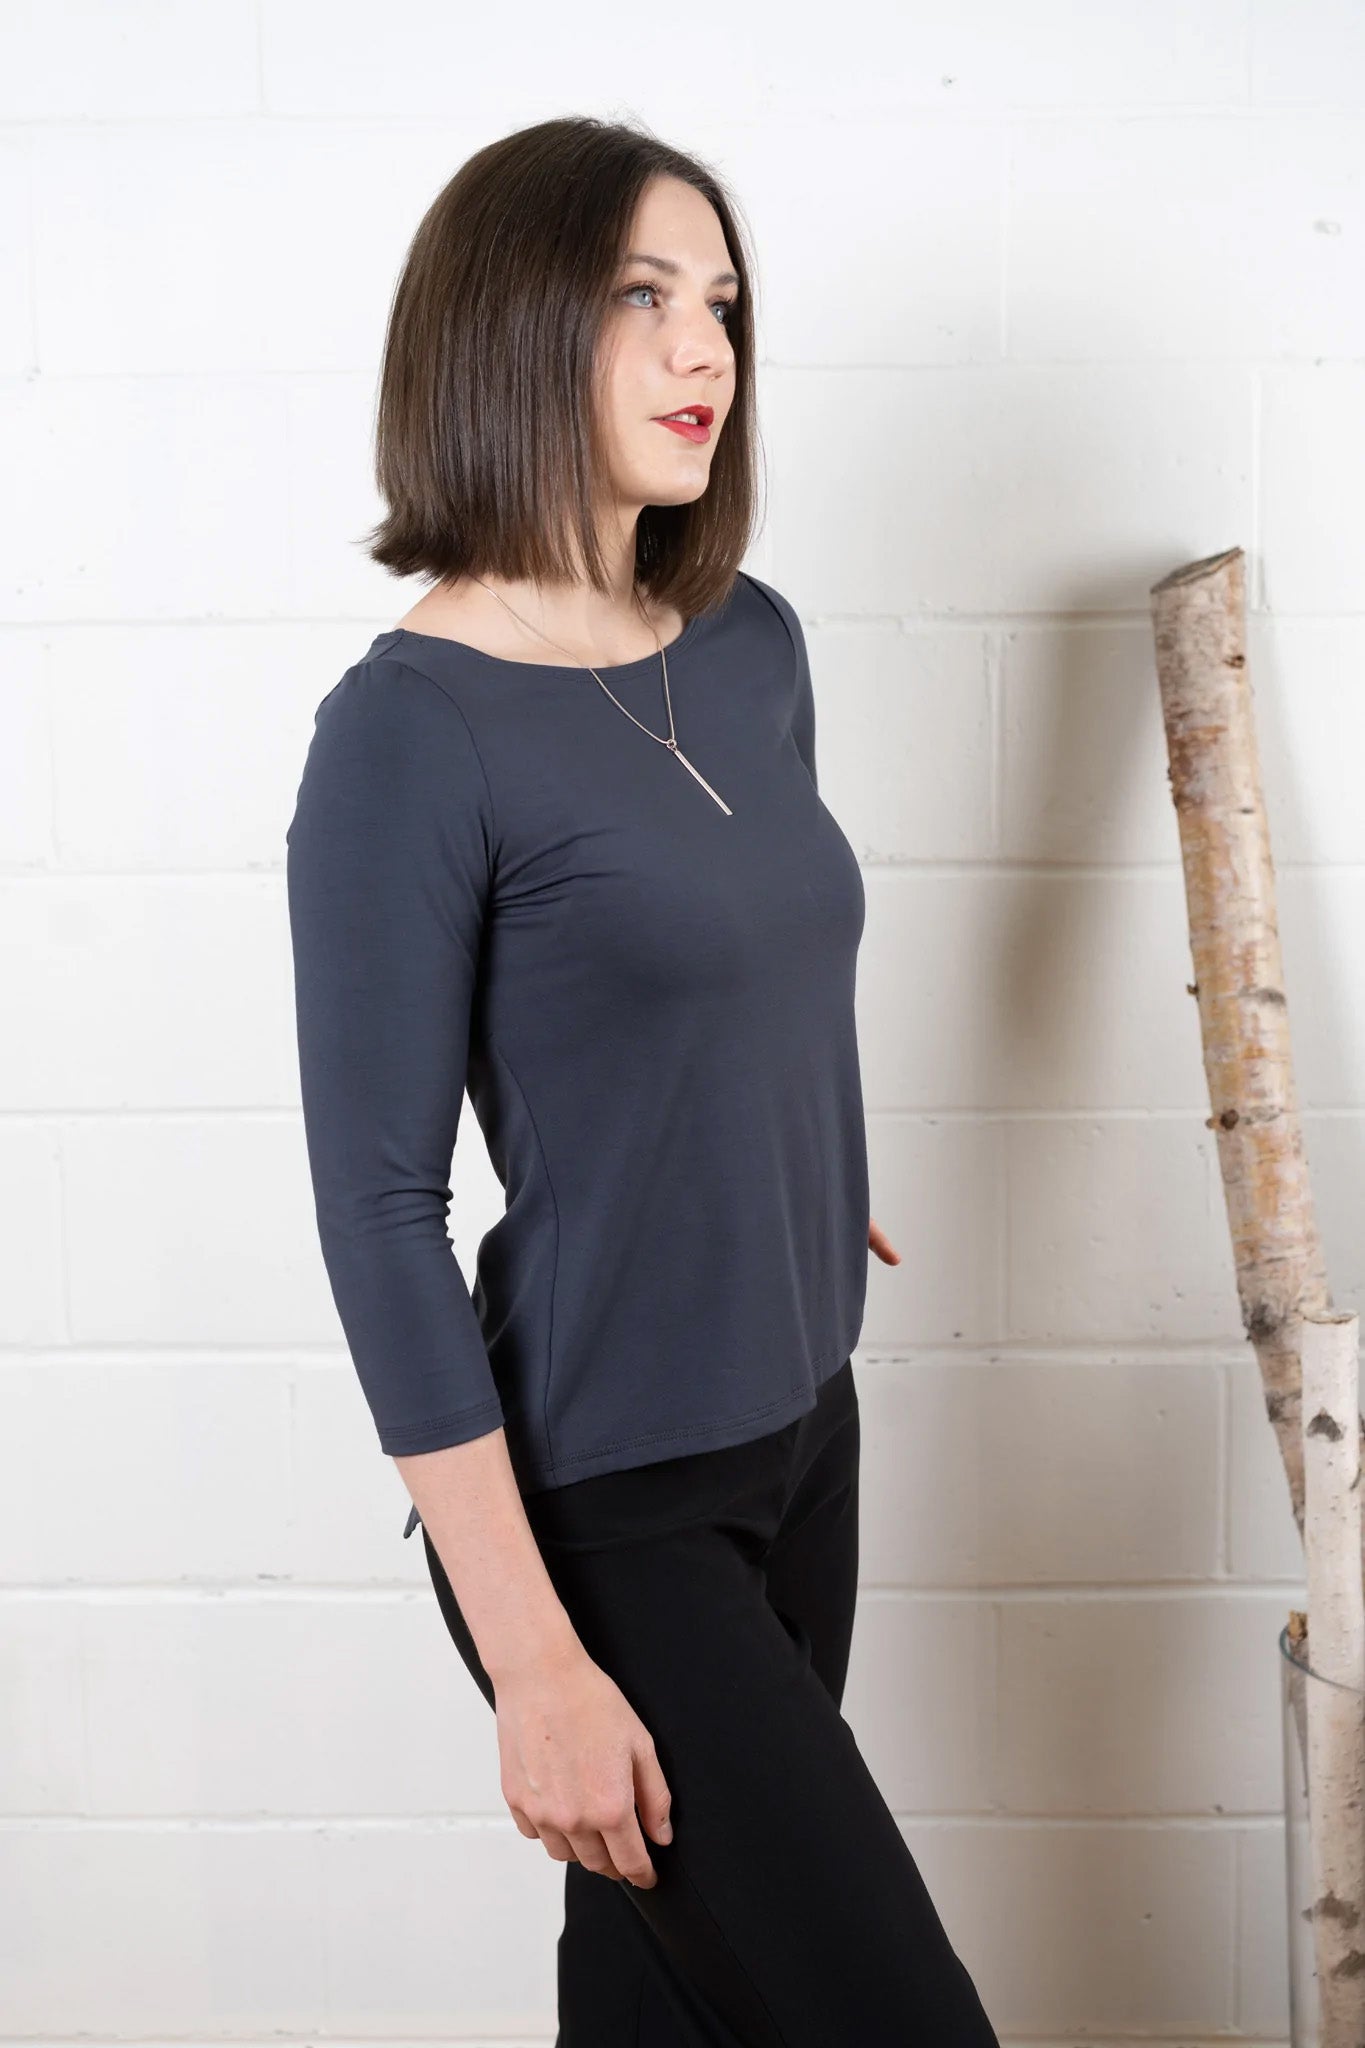 3/4 Sleeve Fela Top by Studio D, Charcoal, side view, boatneck, 3/4 sleeves, split back, sizes XS to XL, made in Ottawa